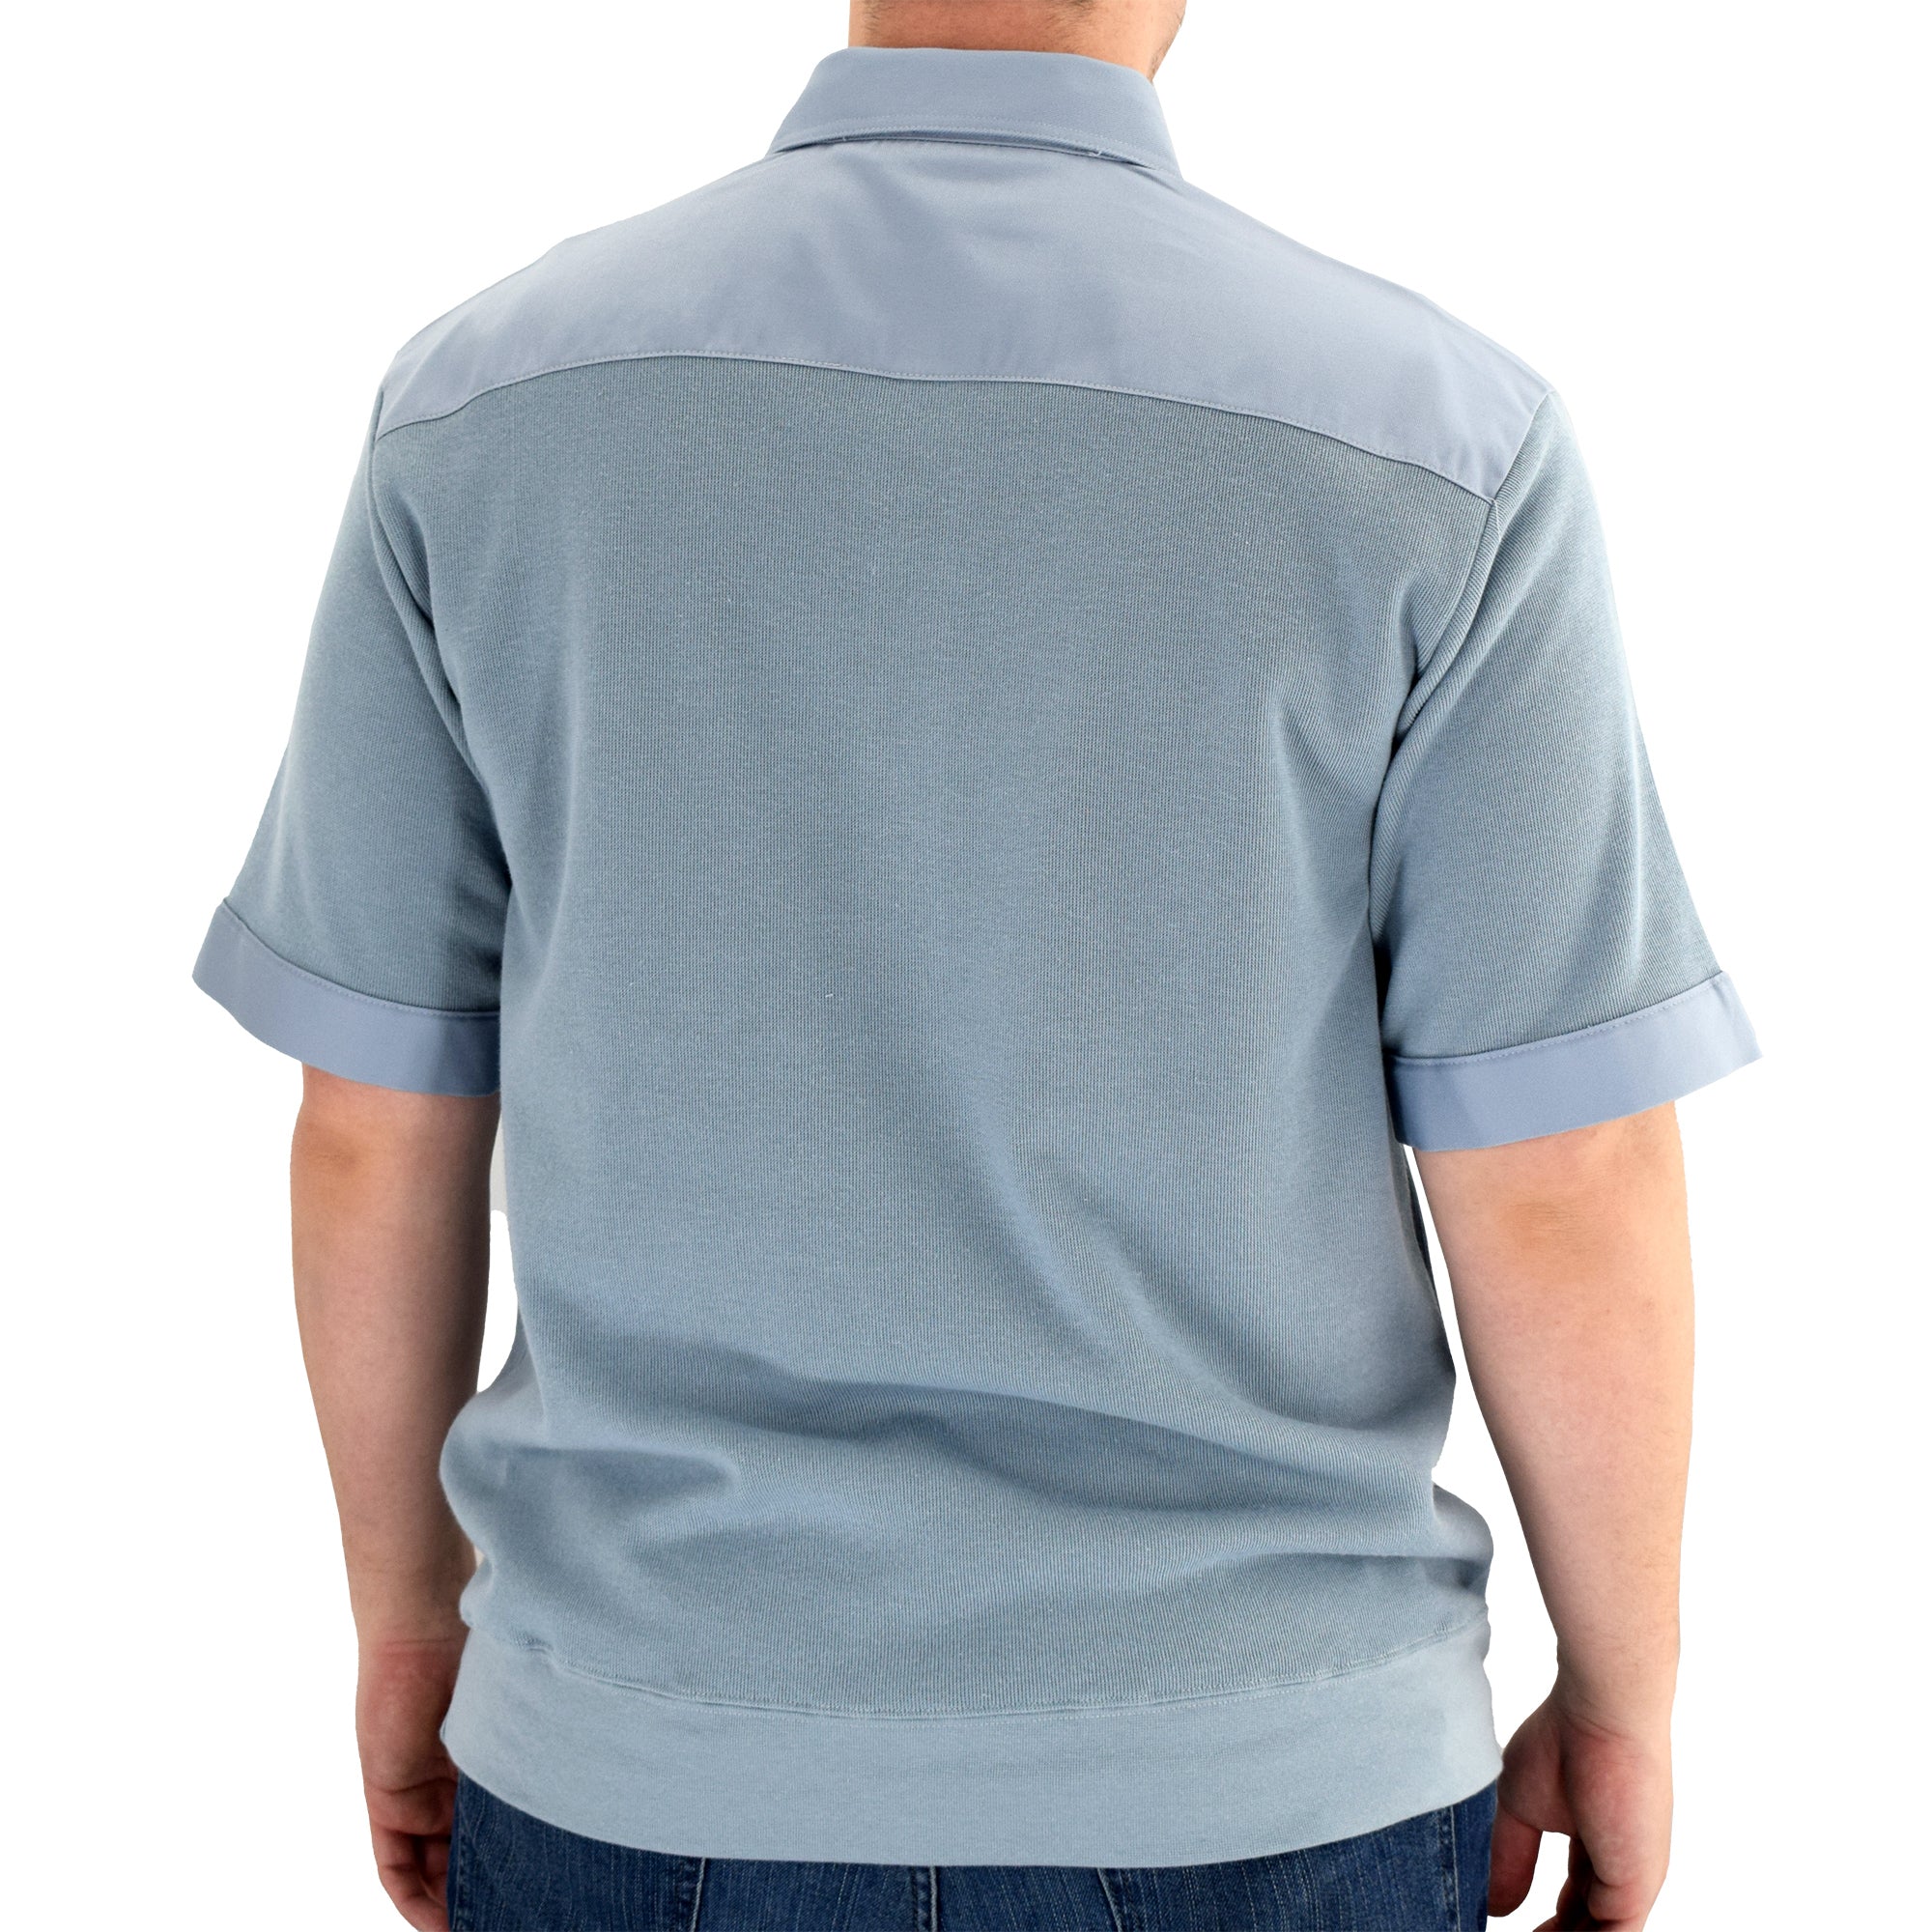 Solid Knit Banded Bottom Shirt with Woven Chest Panel 6041-22N - Chambray - theflagshirt